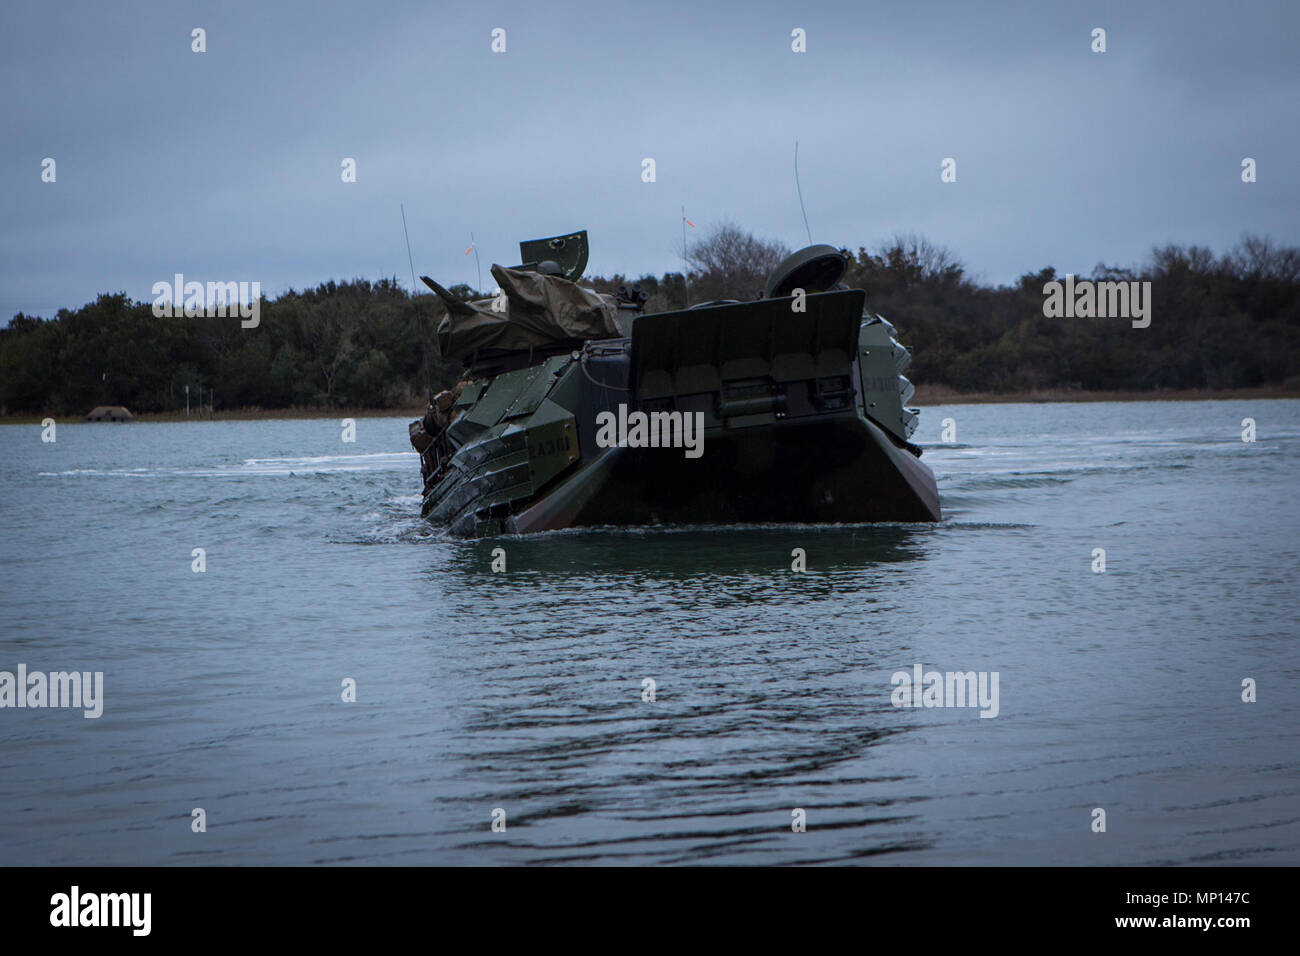 U.S. Marines with 2nd Assault Amphibian Battalion (2d AABN), 2nd Marine Division (2d MARDIV), conduct an amphibious movement aboard an AAV-7A1 Assault Amphibious Vehicle during the unit's Marine Corps Combat Readiness Evaluation (MCCRE) on Camp Lejeune, N.C., March 12, 2018. The MCCRE is a pre-deployment training evaluation designed to test the skills of Marines and Sailors with possible combat scenarios. Stock Photo